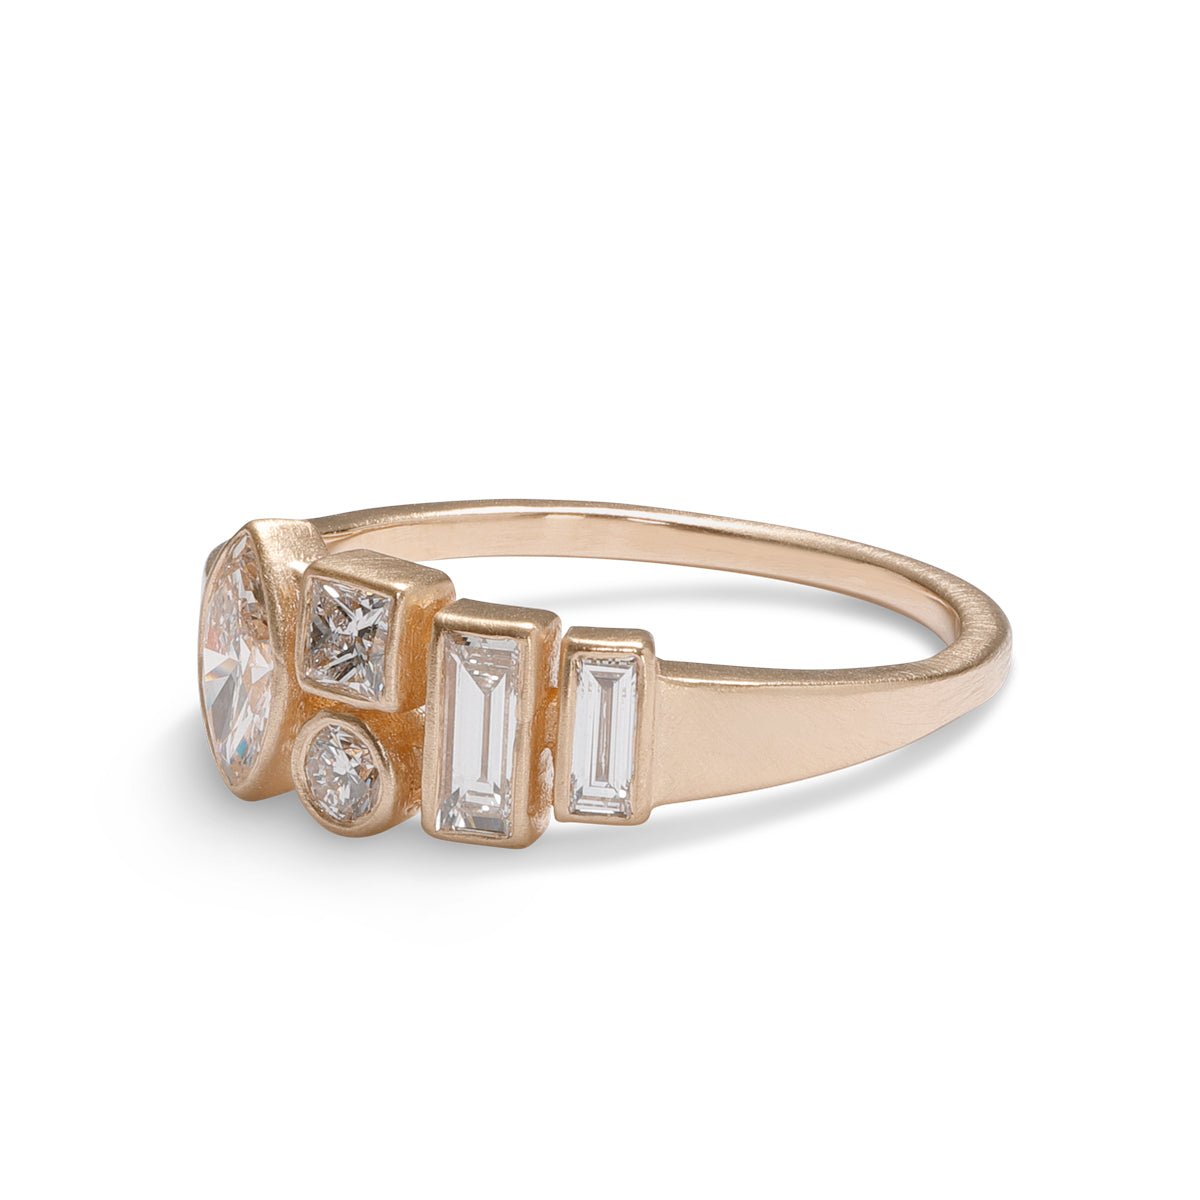 Astrum 14K gold ring with lab-grown diamonds. Designed and handcrafted in Portland, Oregon.